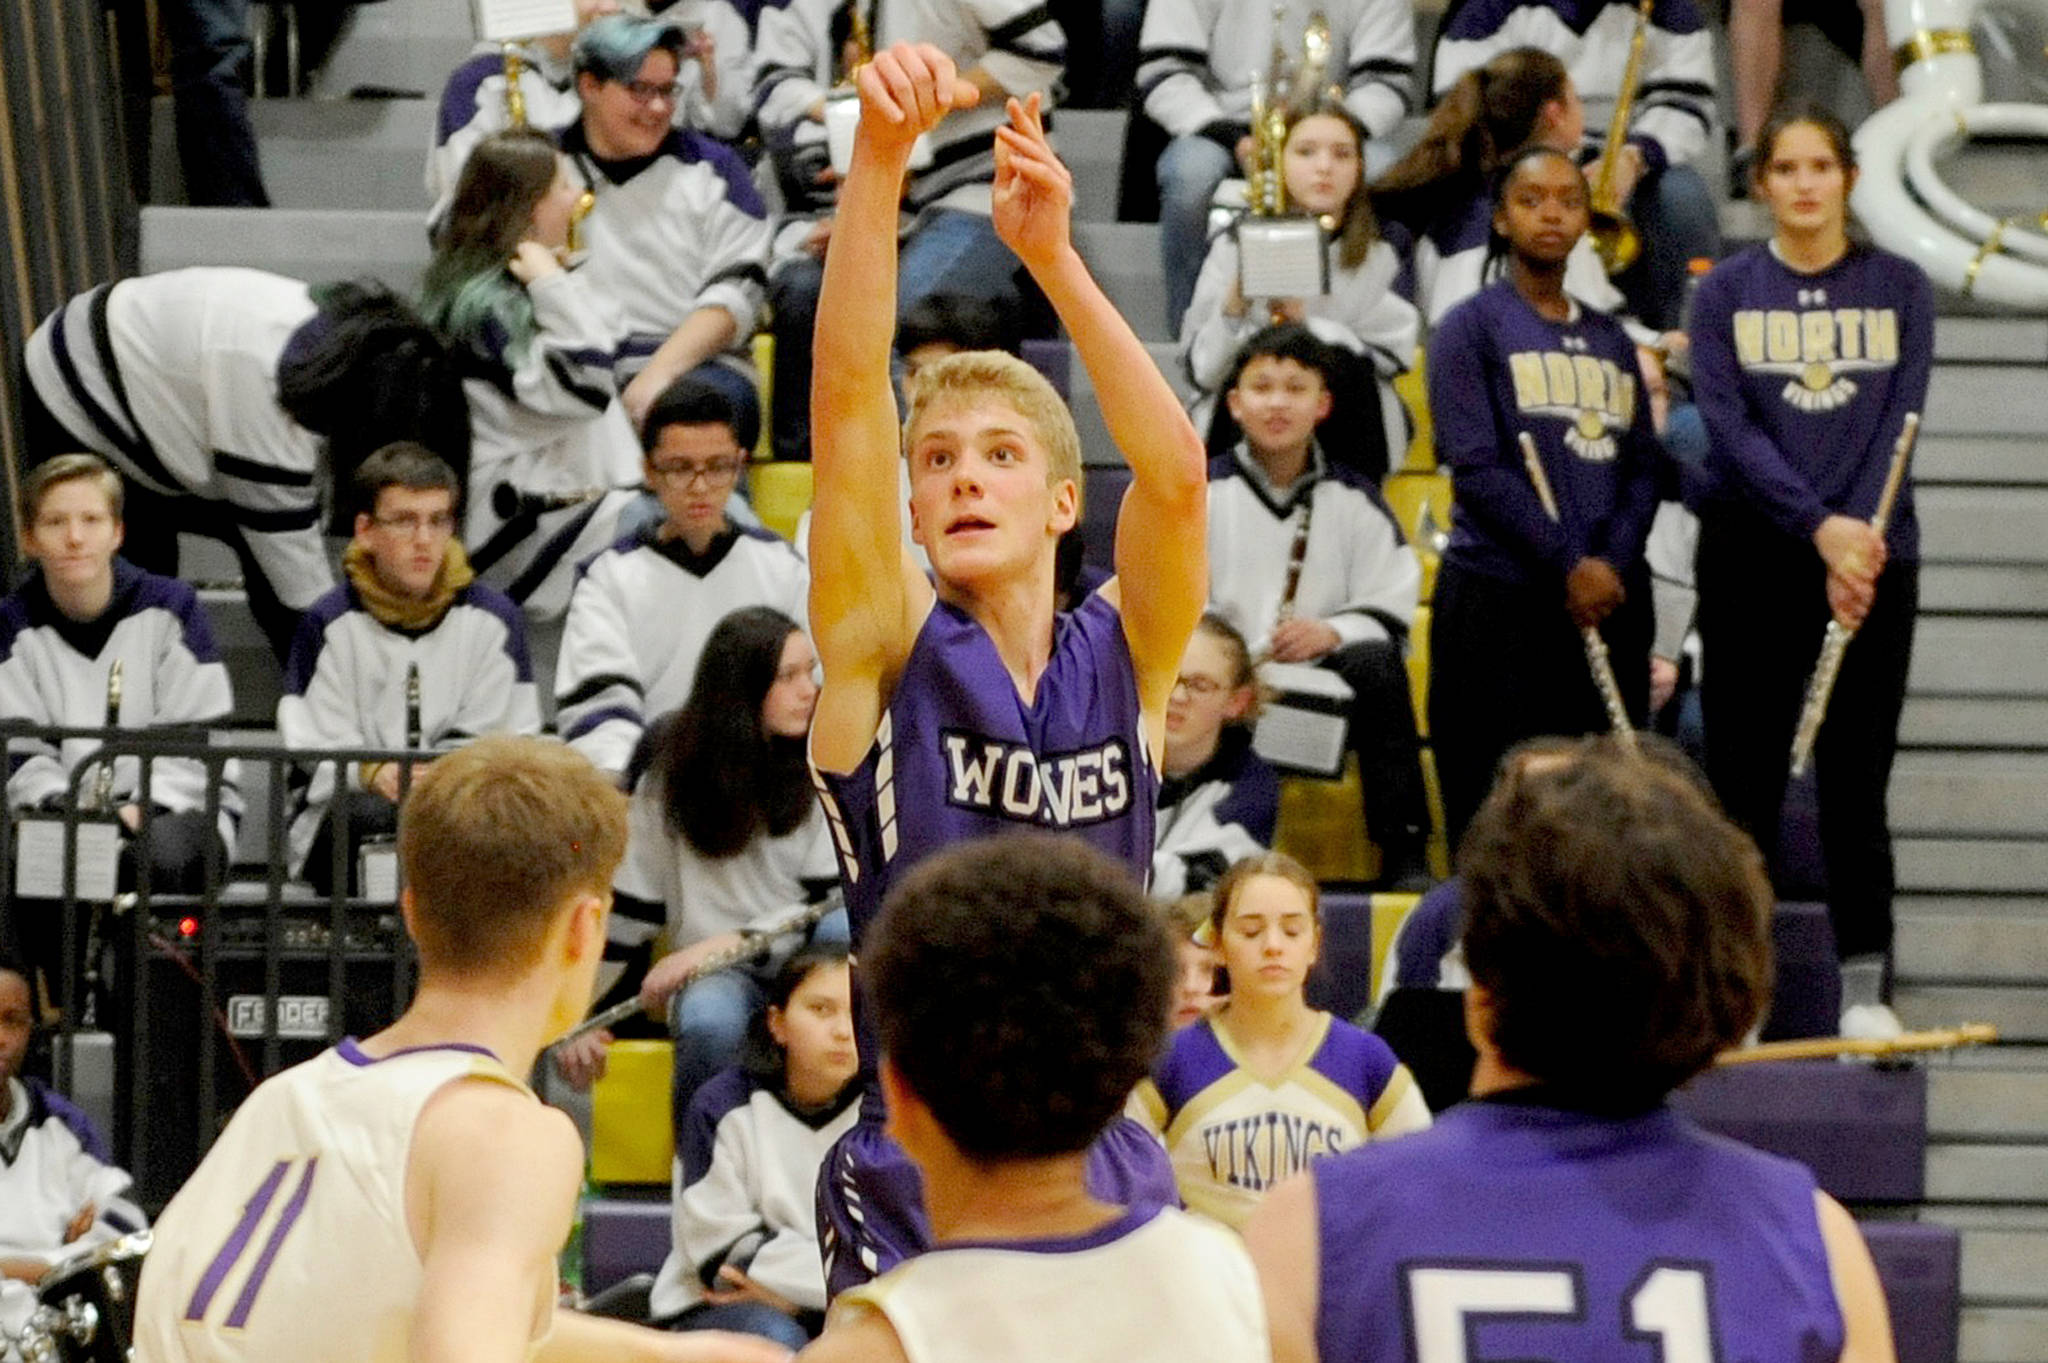 Sequim Wolves guard Erik Christiansen rises up for a 3-point shot in the second quarter of the Wolves’ 74-54 loss to the North Kitsap Vikings on Jan. 7. Christiansen lead the Wolves in scoring with 16 points on 6-of-14 shooting, including making two of six shots from 3-point range. Sequim Gazette photo by Conor Dowley